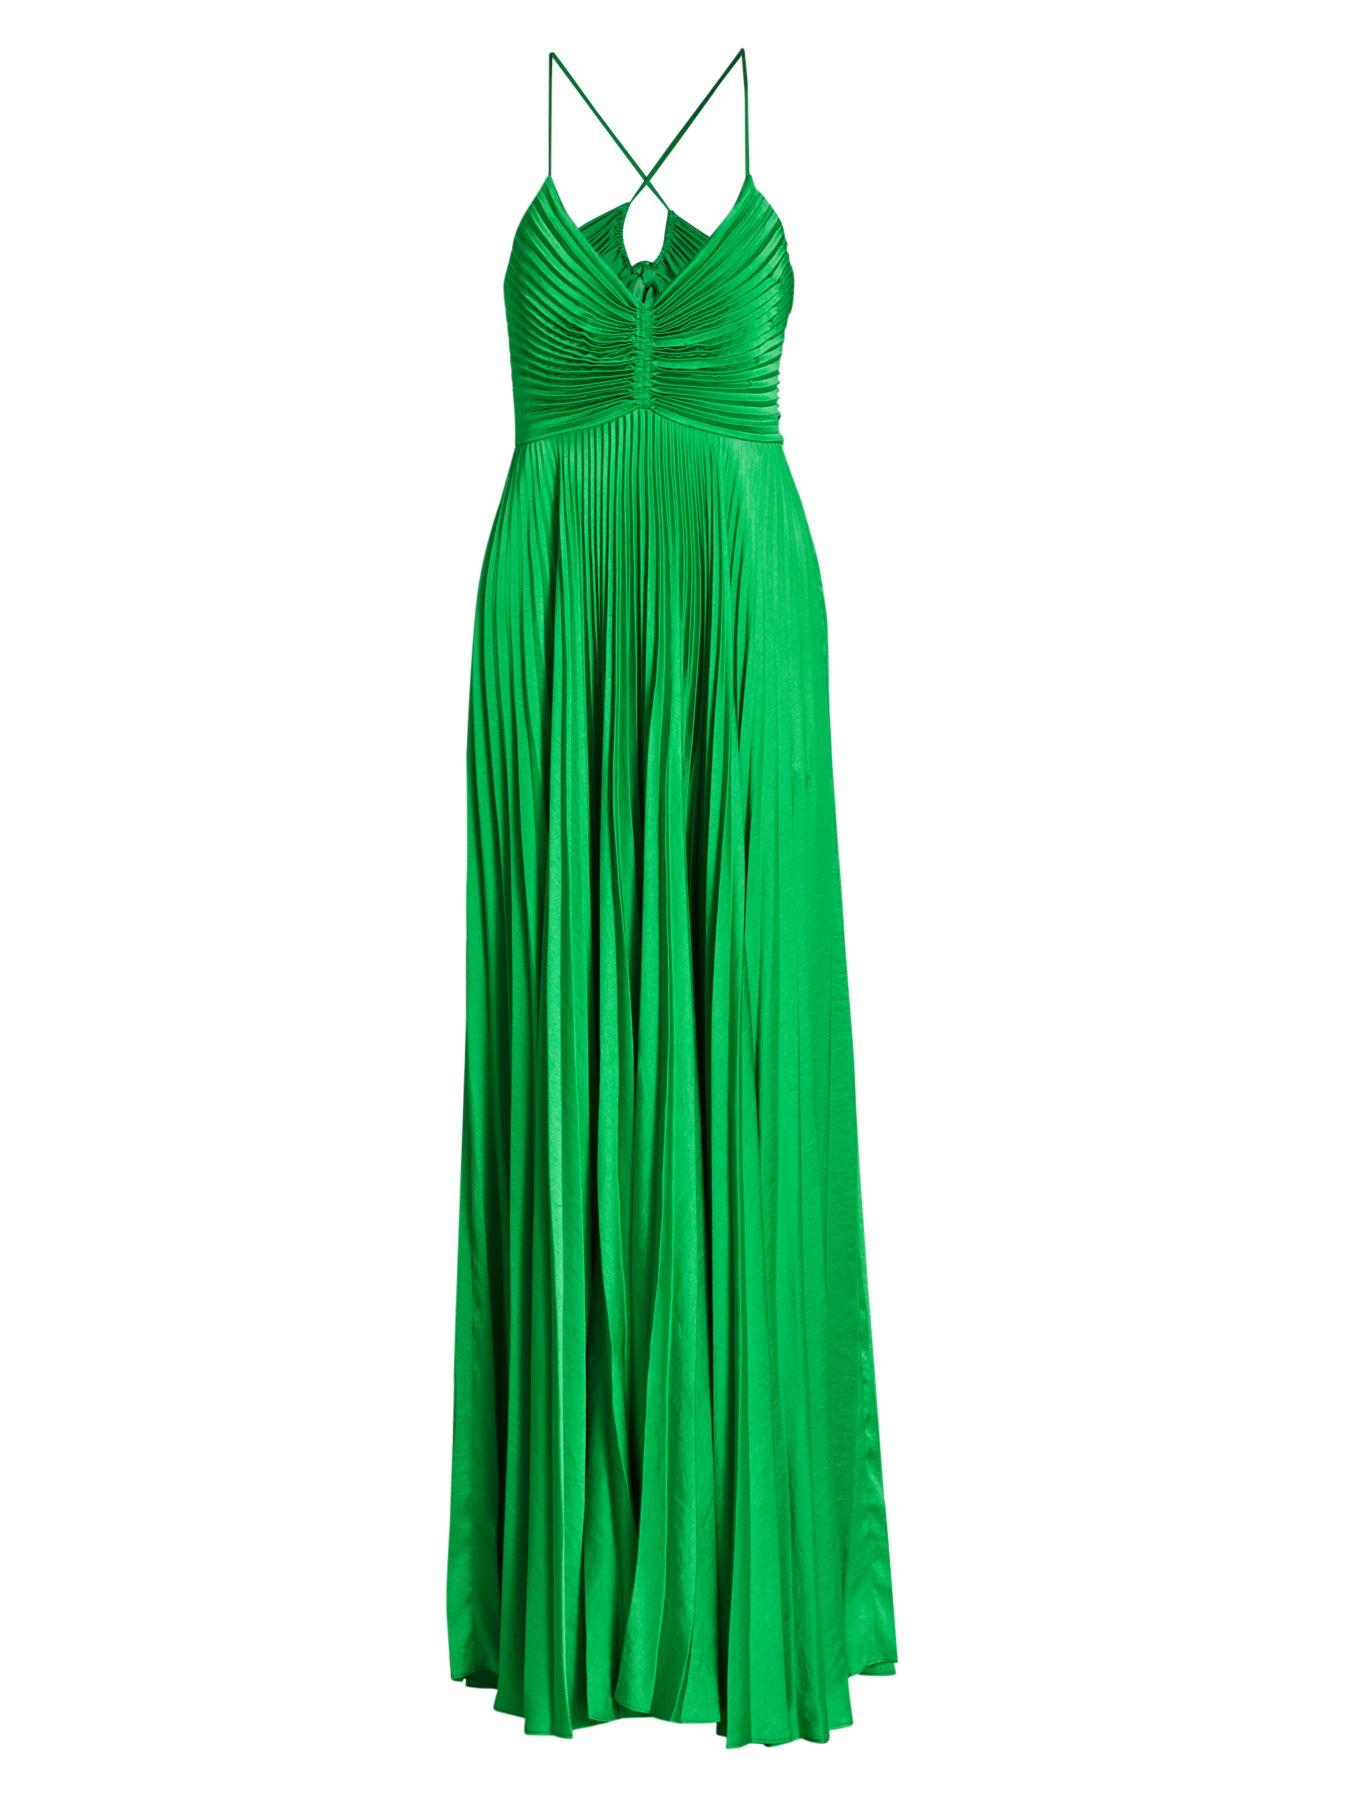 A.L.C. Synthetic Aries Pleated Gown in Green - Lyst